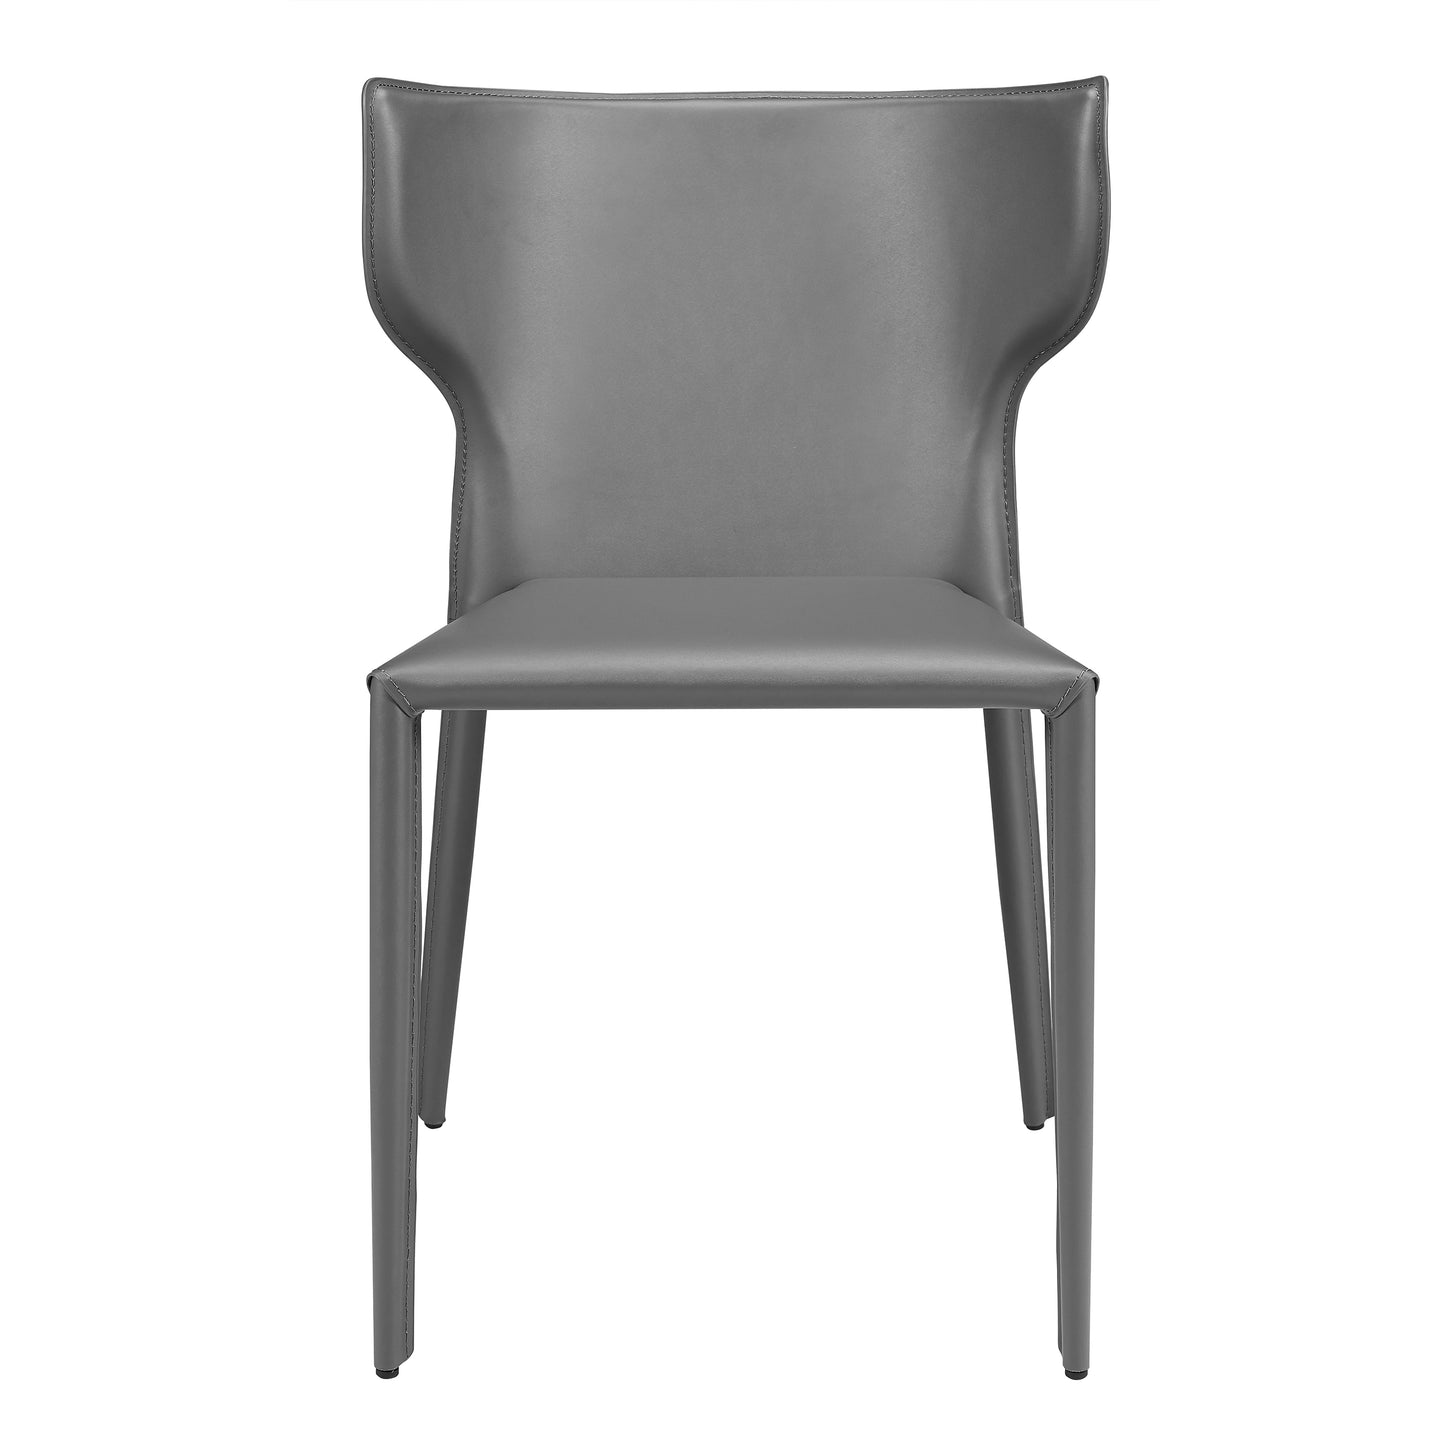 Divinia Stacking Chair(Set of Two) GrayChair Eurostyle  Gray   Four Hands, Mid Century Modern Furniture, Old Bones Furniture Company, Old Bones Co, Modern Mid Century, Designer Furniture, https://www.oldbonesco.com/